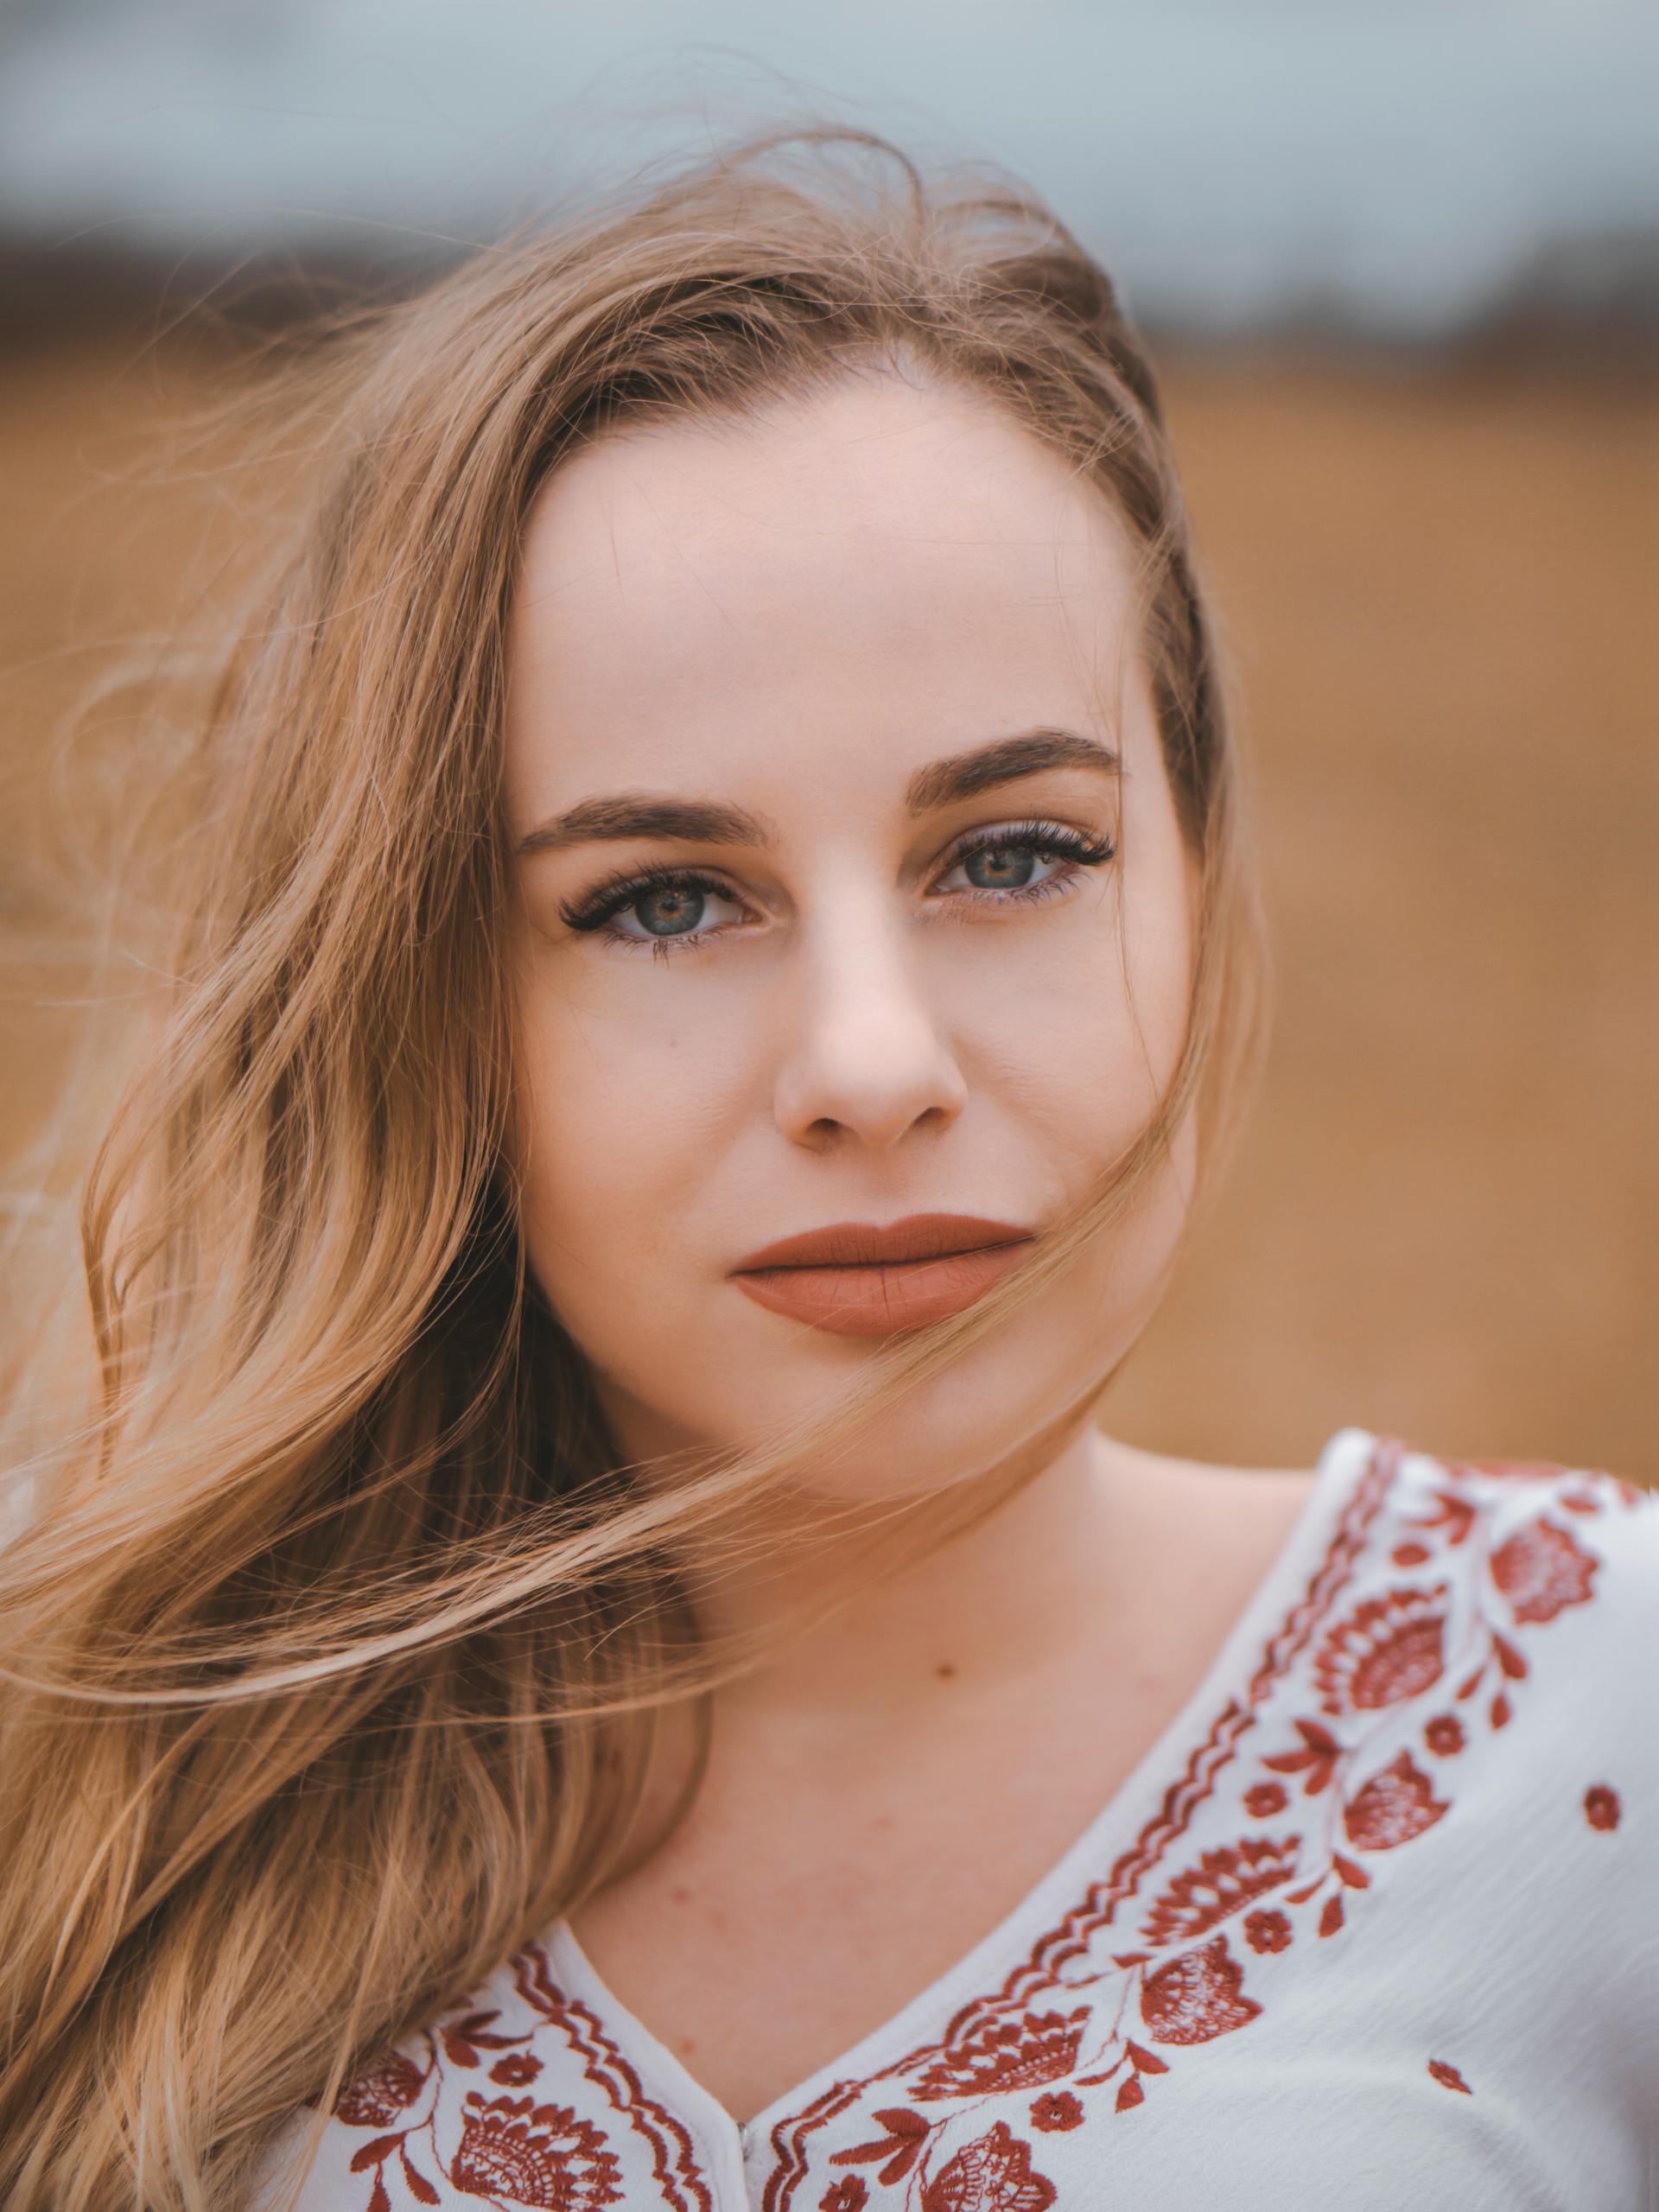 A young woman wearing a white floral top | Source: Pexels